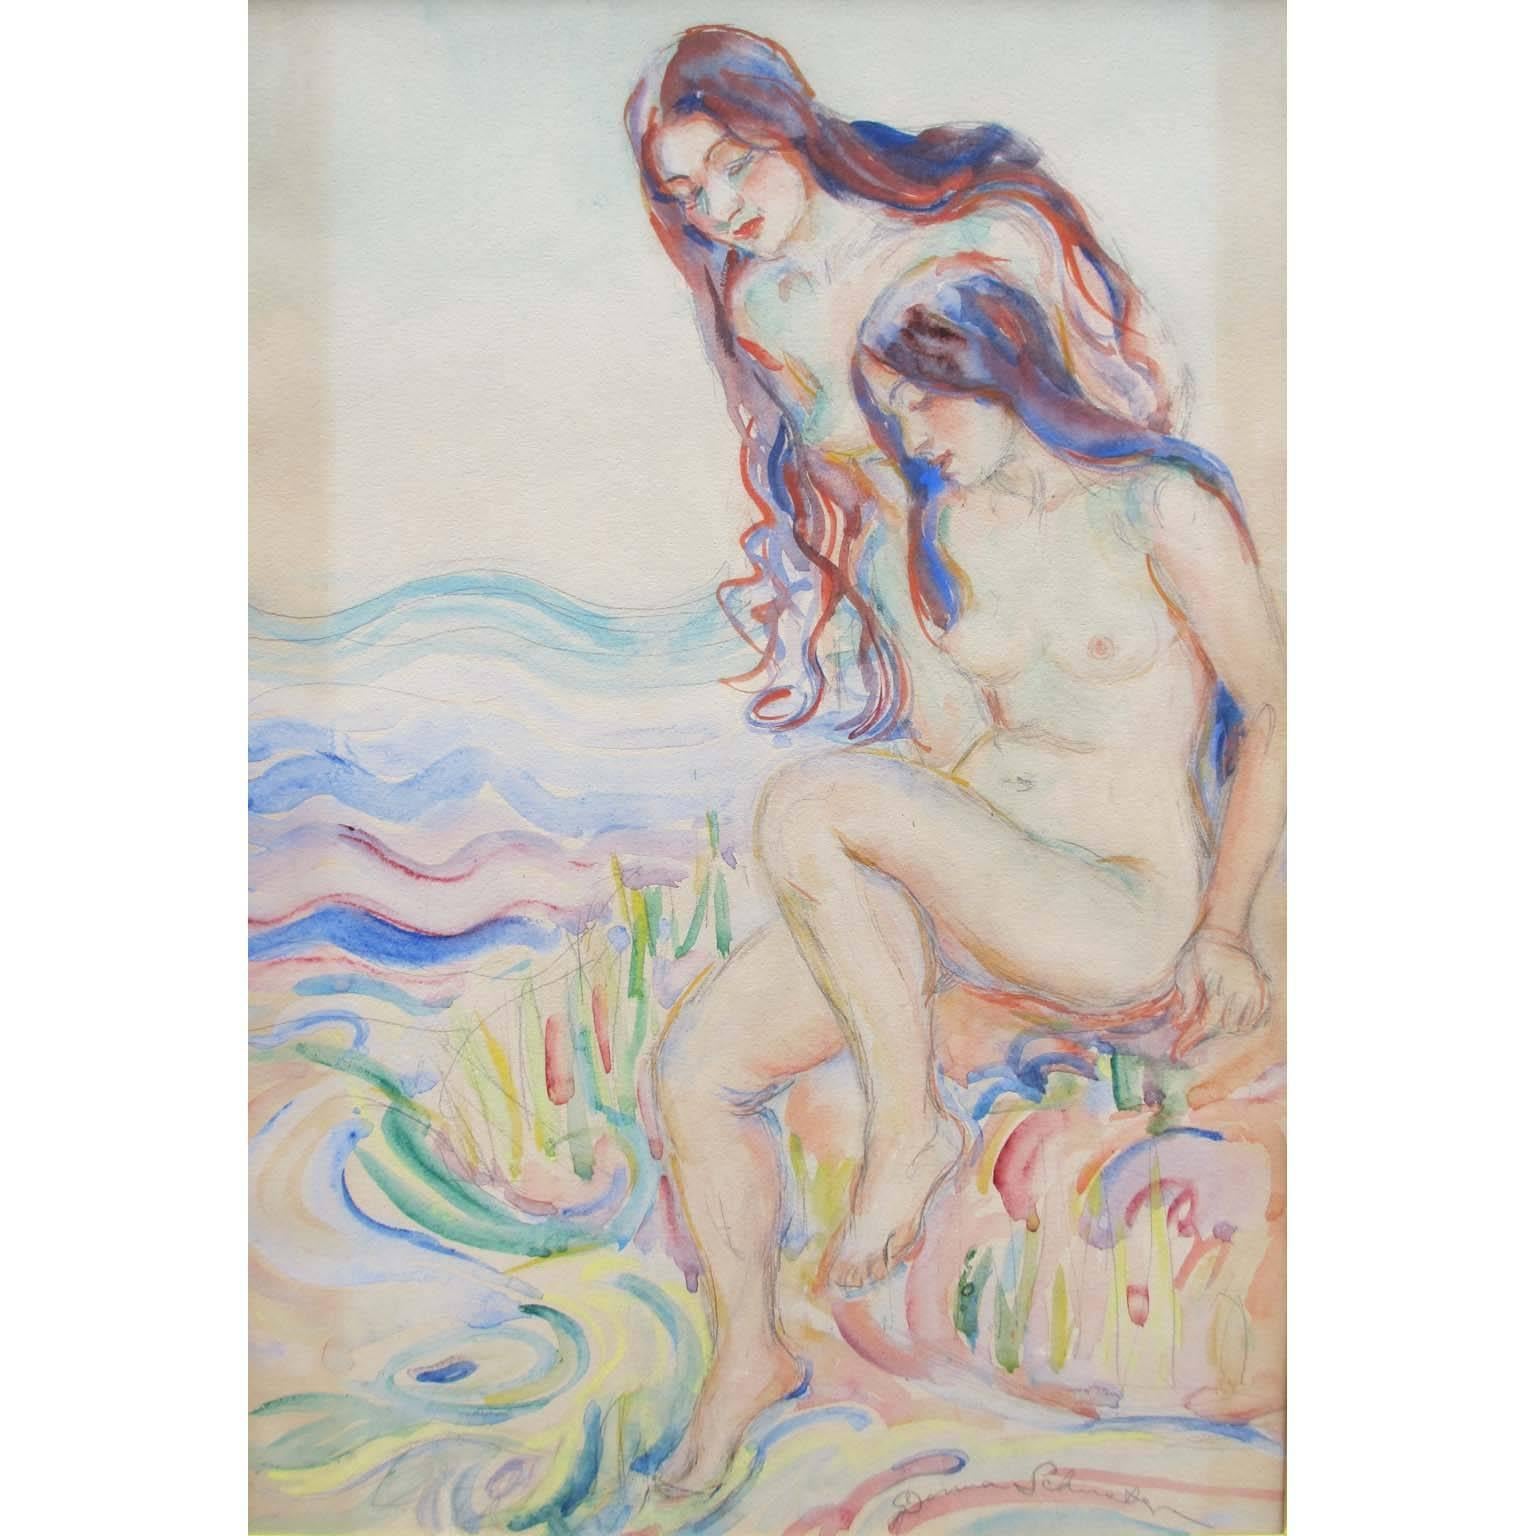 Donna Schuster (1893-1953) “Nude Bathers” watercolor, pencil and gouache within a giltwood carved frame and protective glass. Signed ‘Donna Schuster’ (Lower Right), circa 1920-1930.

Donna Norine Schuster was born in Milwaukee, Wisconsin on